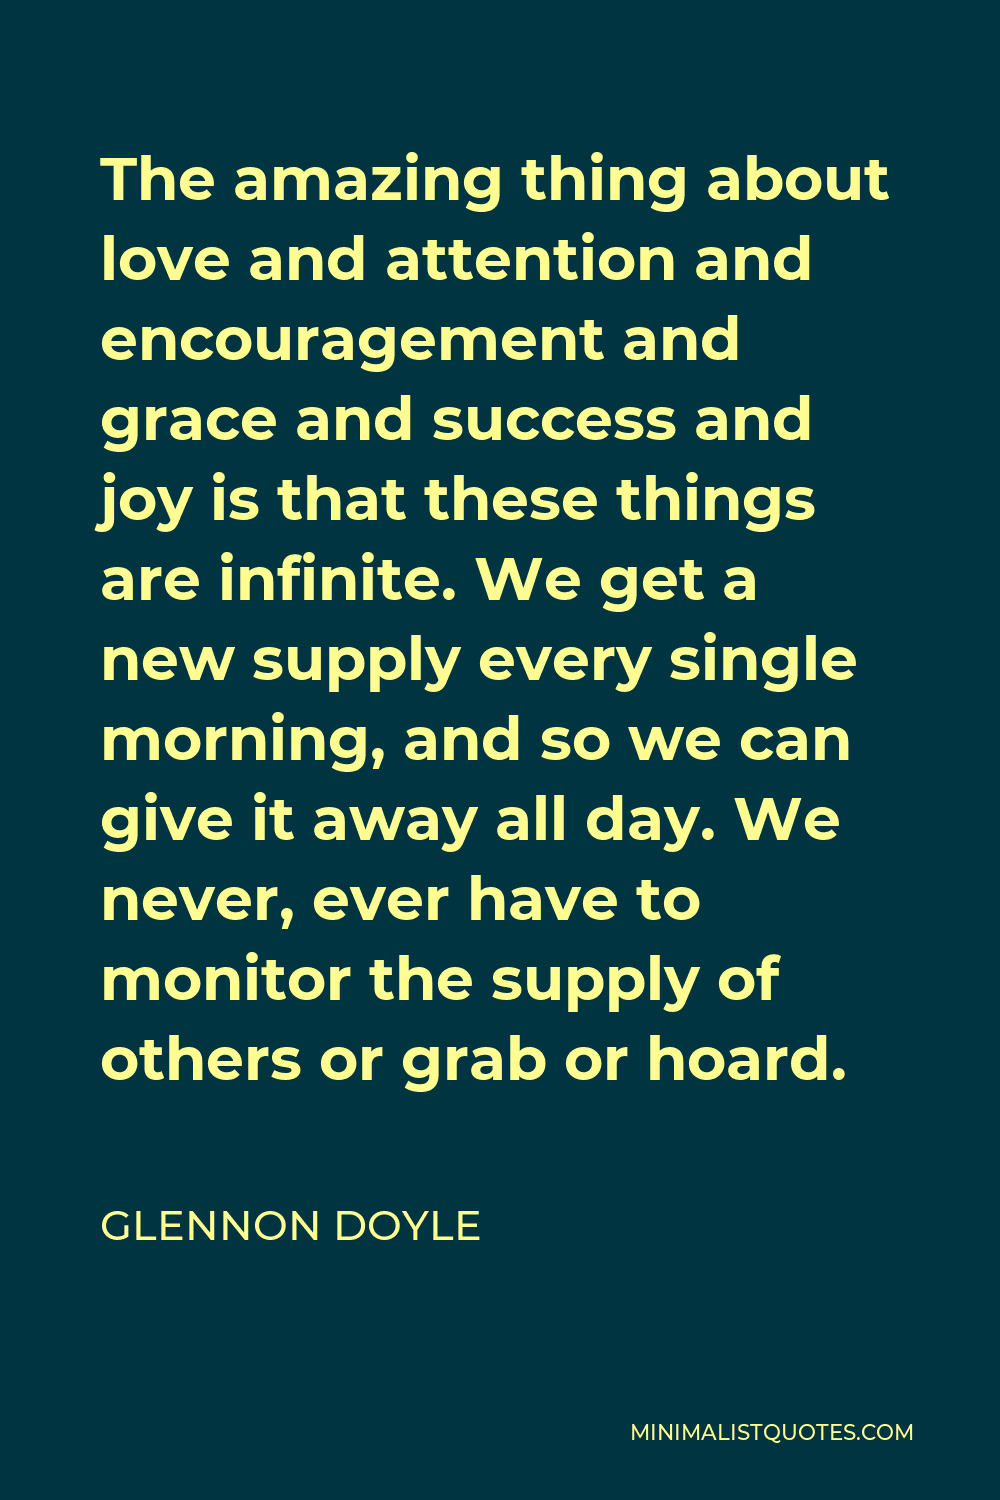 Glennon Doyle Quote - The amazing thing about love and attention and encouragement and grace and success and joy is that these things are infinite. We get a new supply every single morning, and so we can give it away all day. We never, ever have to monitor the supply of others or grab or hoard.